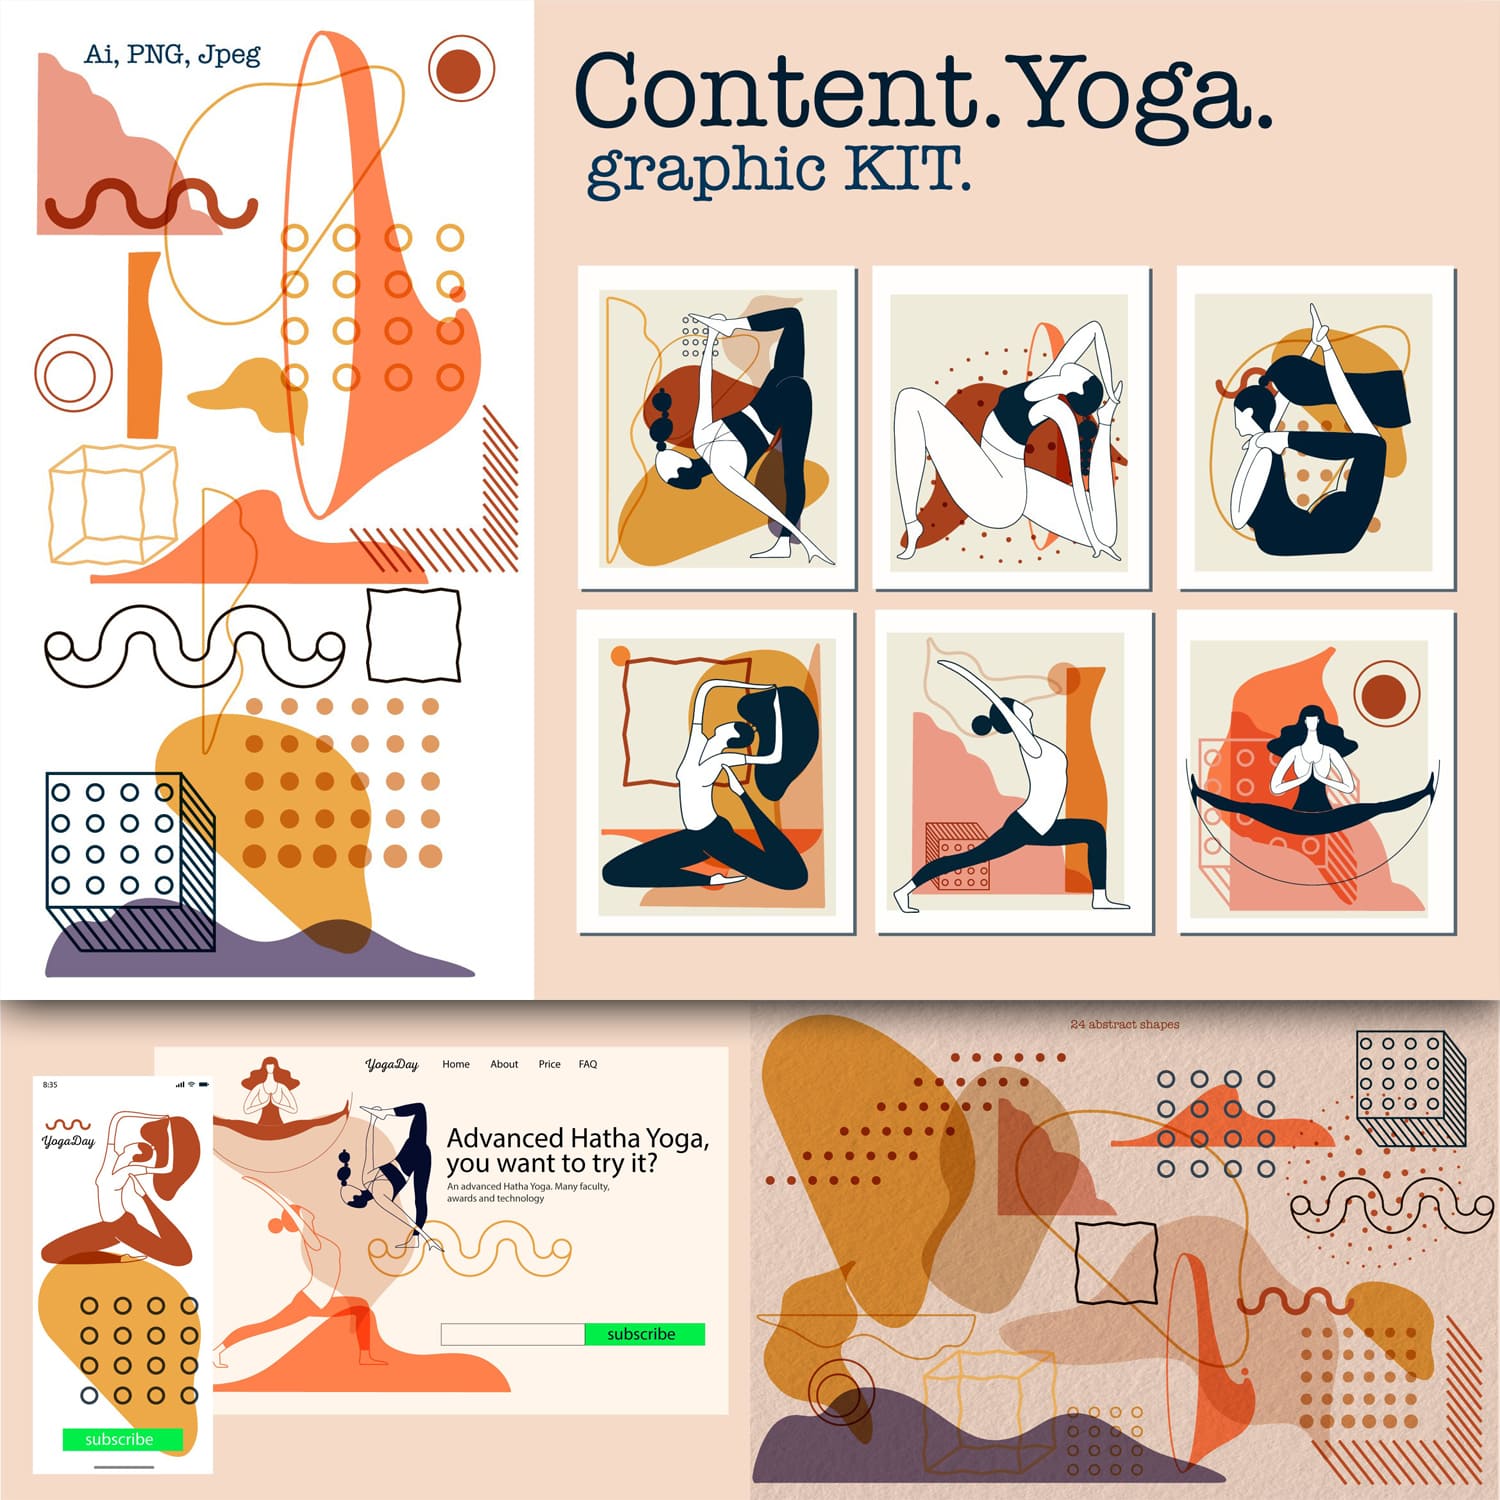 Content yoga graphic kit - main image preview.